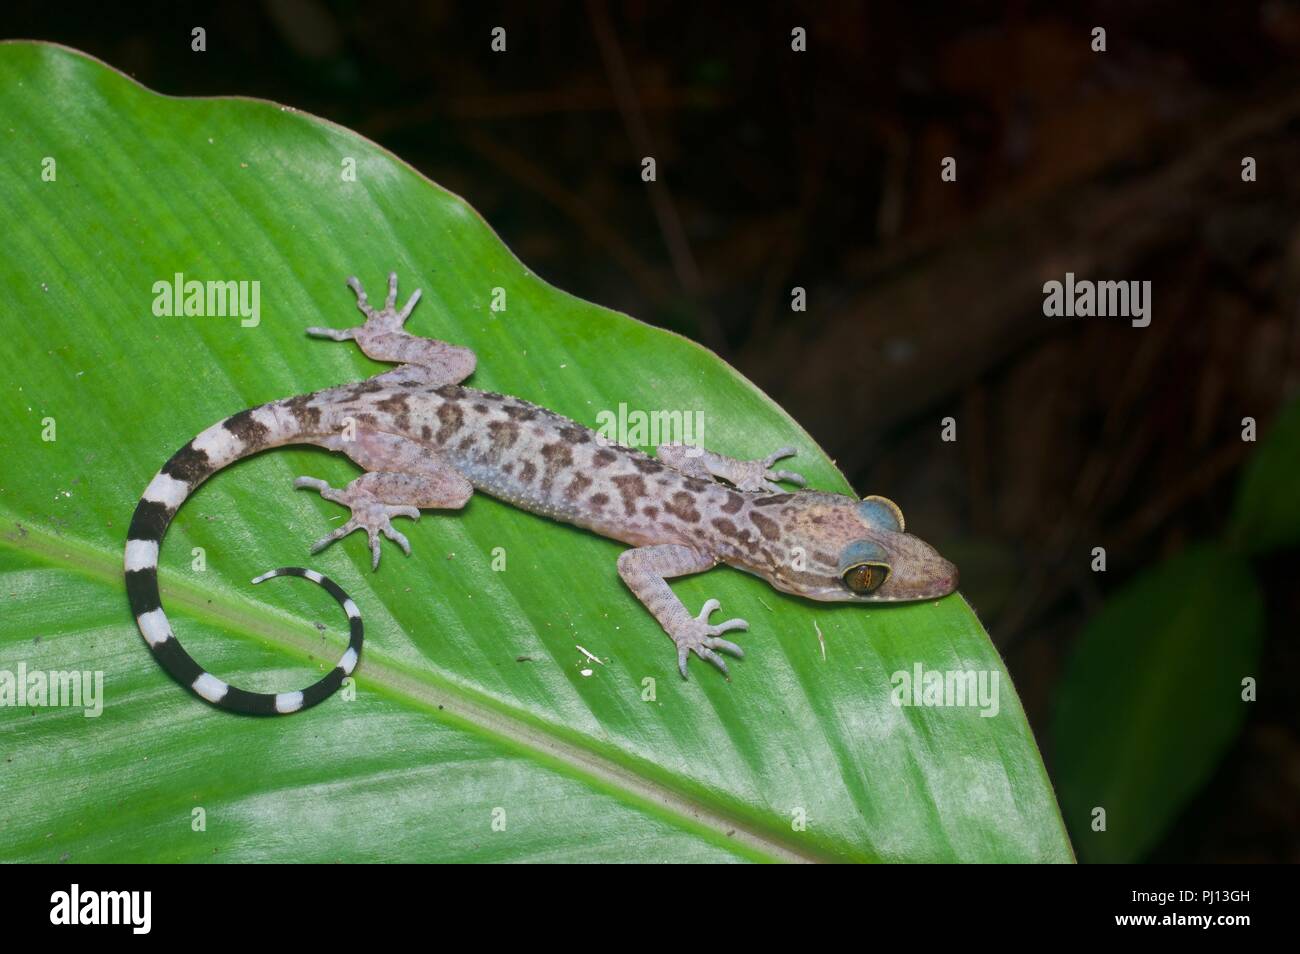 An Inger's Bent-toed Gecko (Cyrtodactylus pubisulcus) in the forest at night in Kubah National Park, Sarawak, East Malaysia, Borneo Stock Photo